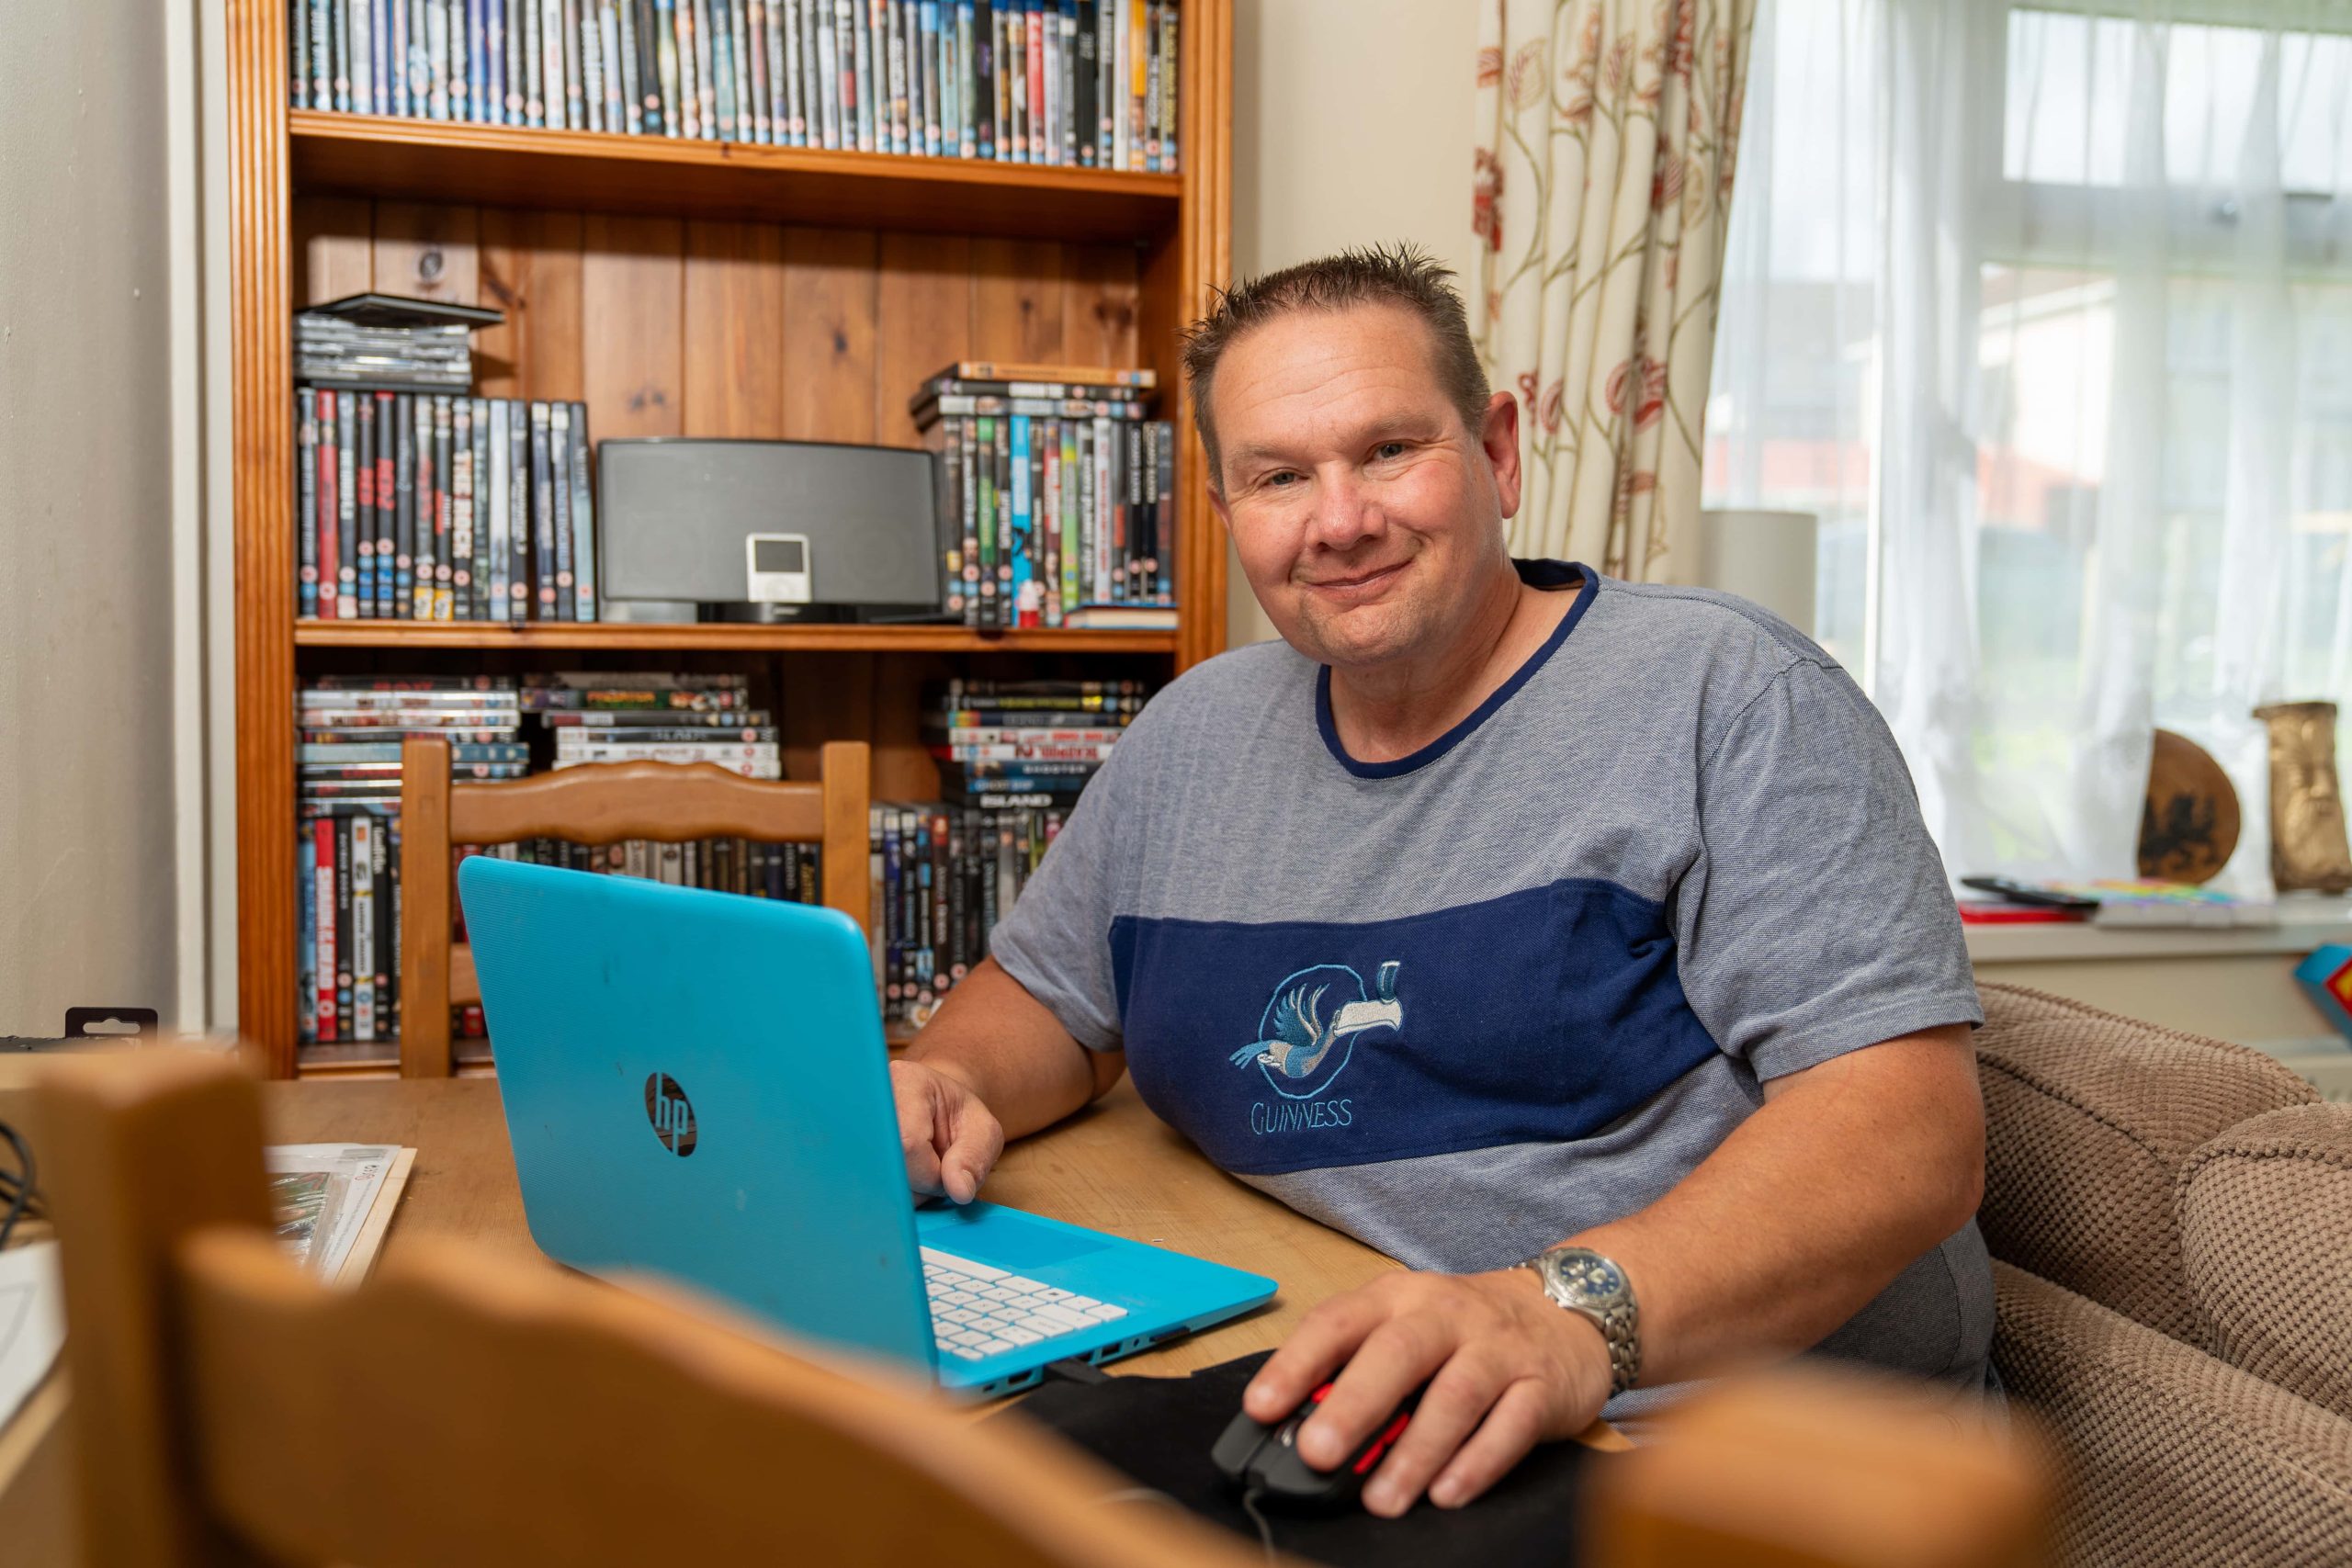 Trivallis Housing Landlord Wales A man seated at a wooden table with a blue laptop, smiling at the camera, with a bookshelf filled with DVDs in the background, inside his Trivallis housing in RCT.